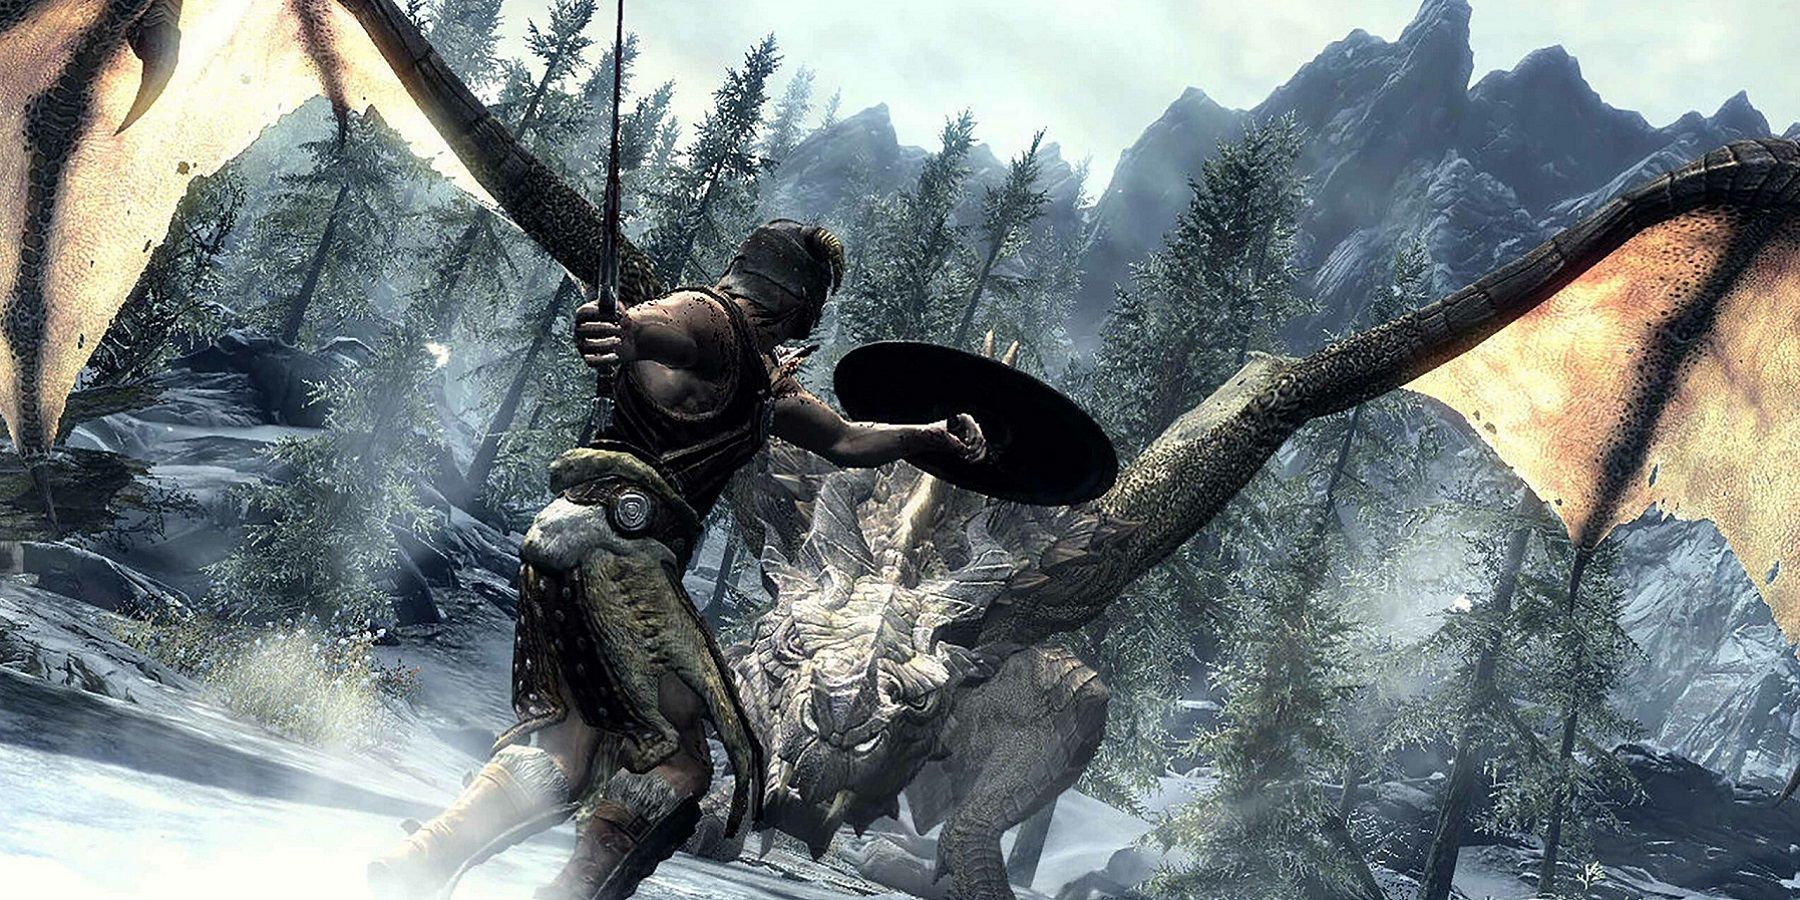 Screenshot from The Elder Scrolls 5: Skyrim showing a player about to strike at a dragon with a sword.